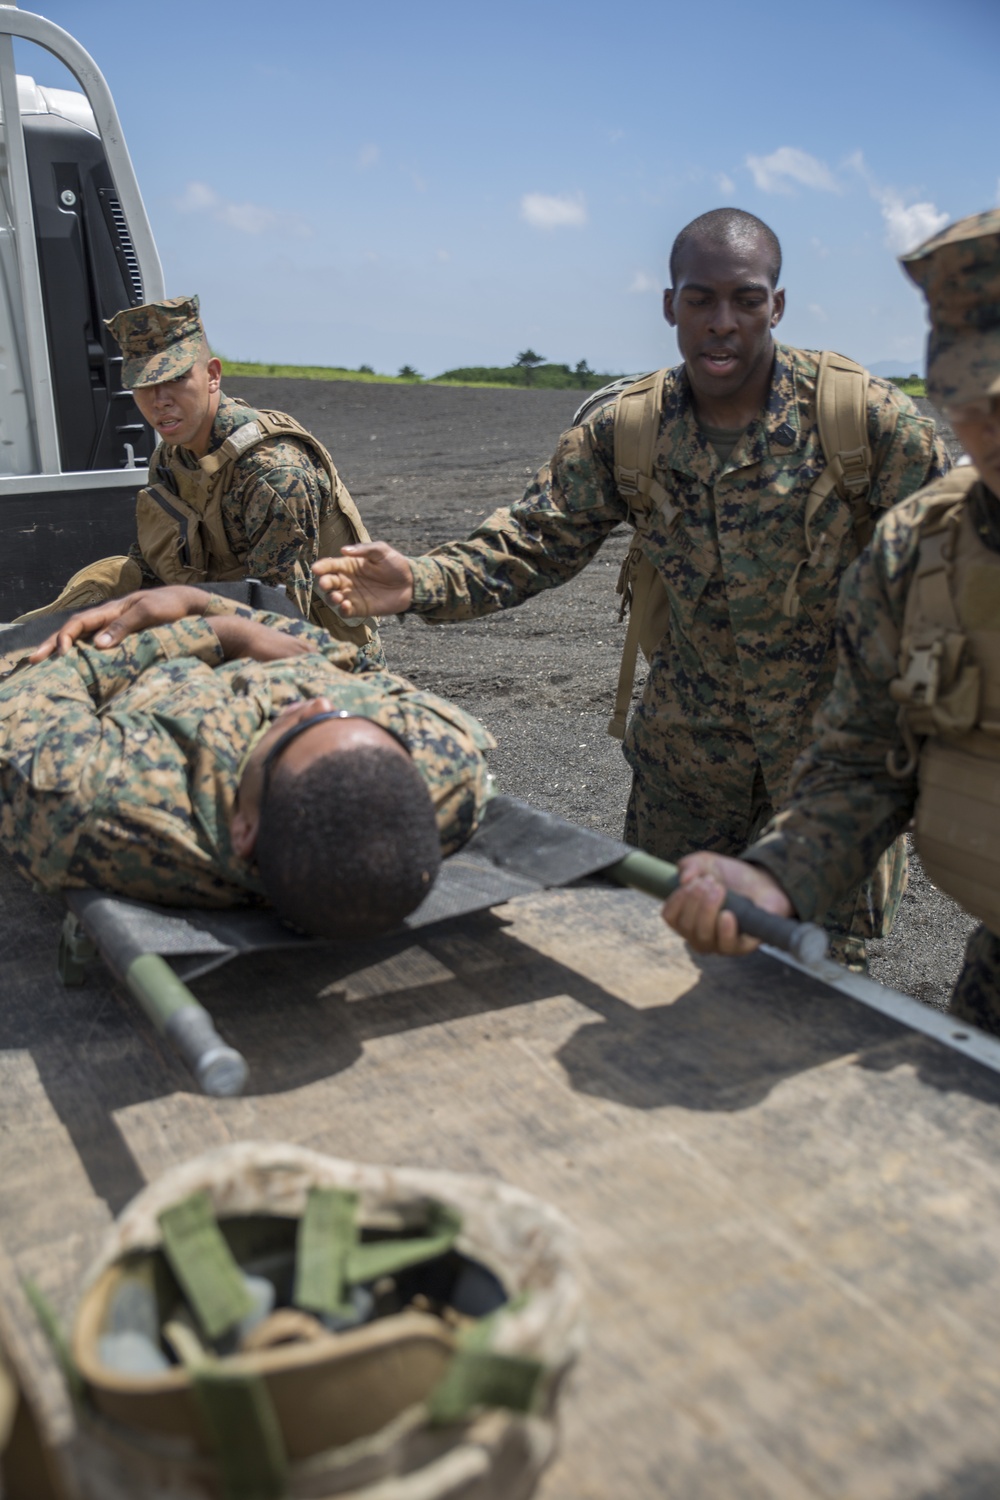 Corpsmen called to action during Exercise Dragon Fire 2015